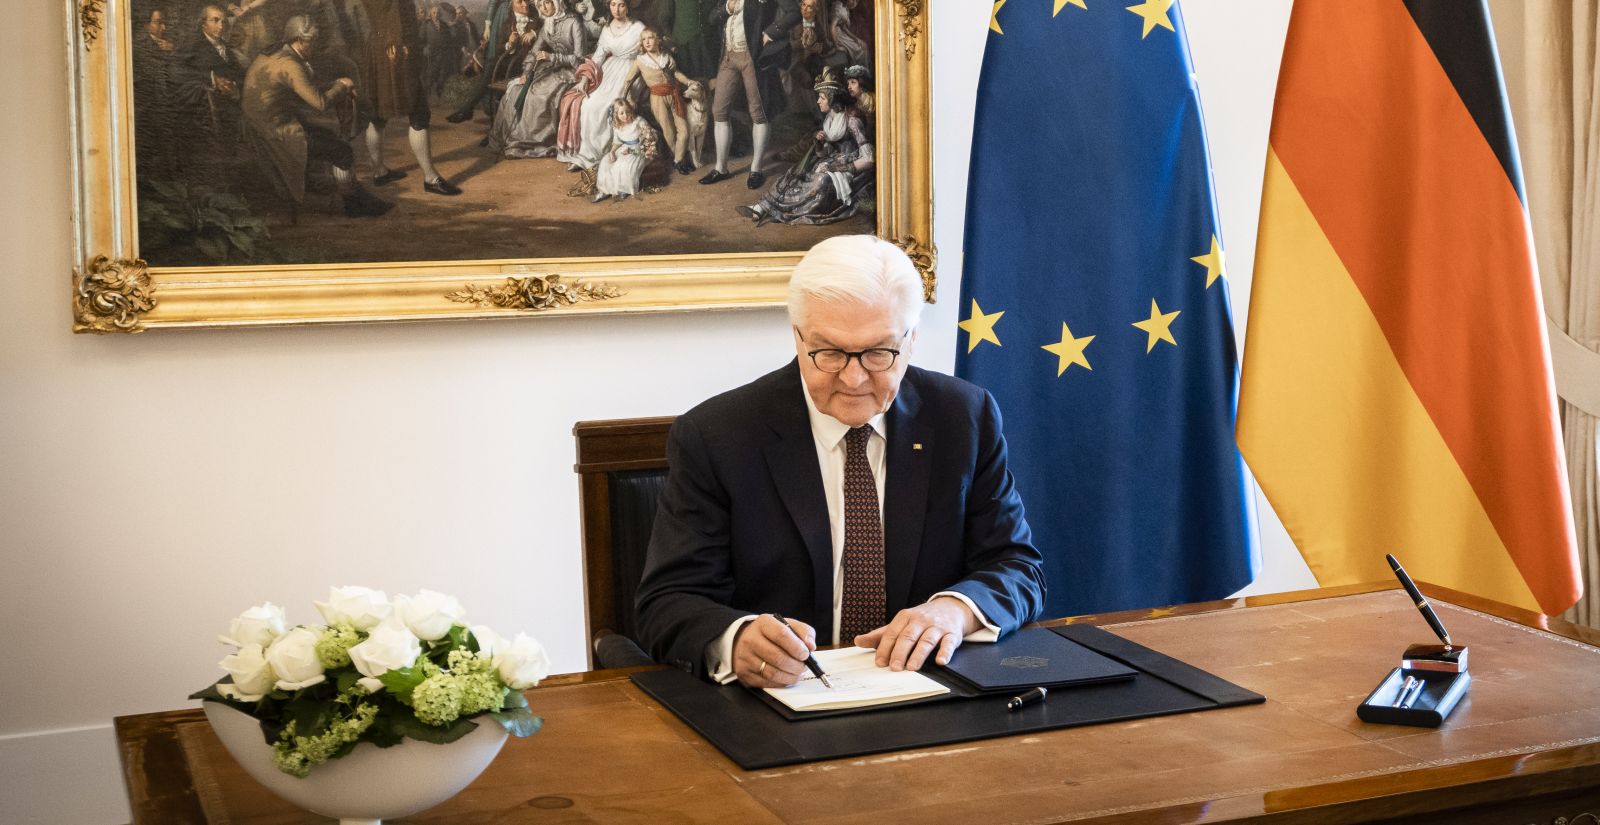 epa09154602 A handout photo made available by the German Federal Government shows German President Frank-Walter Steinmeier signing the law ratifying the Council of the EU's own resources decision, Corona reconstruction fund, in the official room of Bellevue Palace in Berlin, Germany, 23 April 2021.  EPA/STEFFEN KUGLER / GERMAN FEDERAL GOVERNMENT / HANDOUT  HANDOUT EDITORIAL USE ONLY/NO SALES